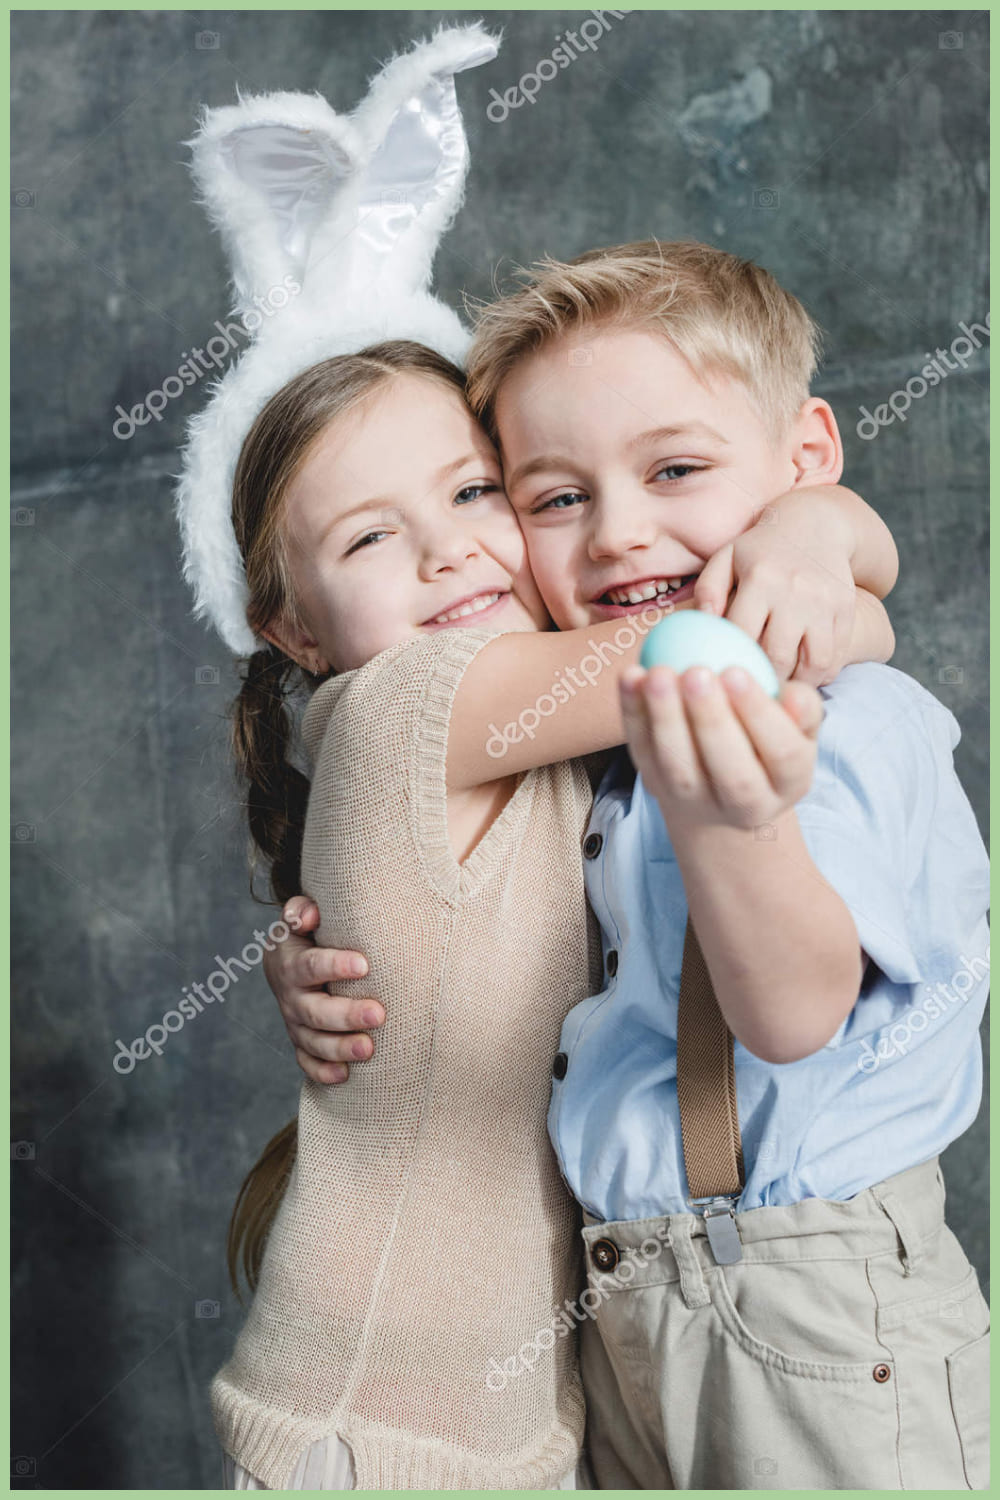 Girl and boy hugging each other and easter egg in boy's hand.